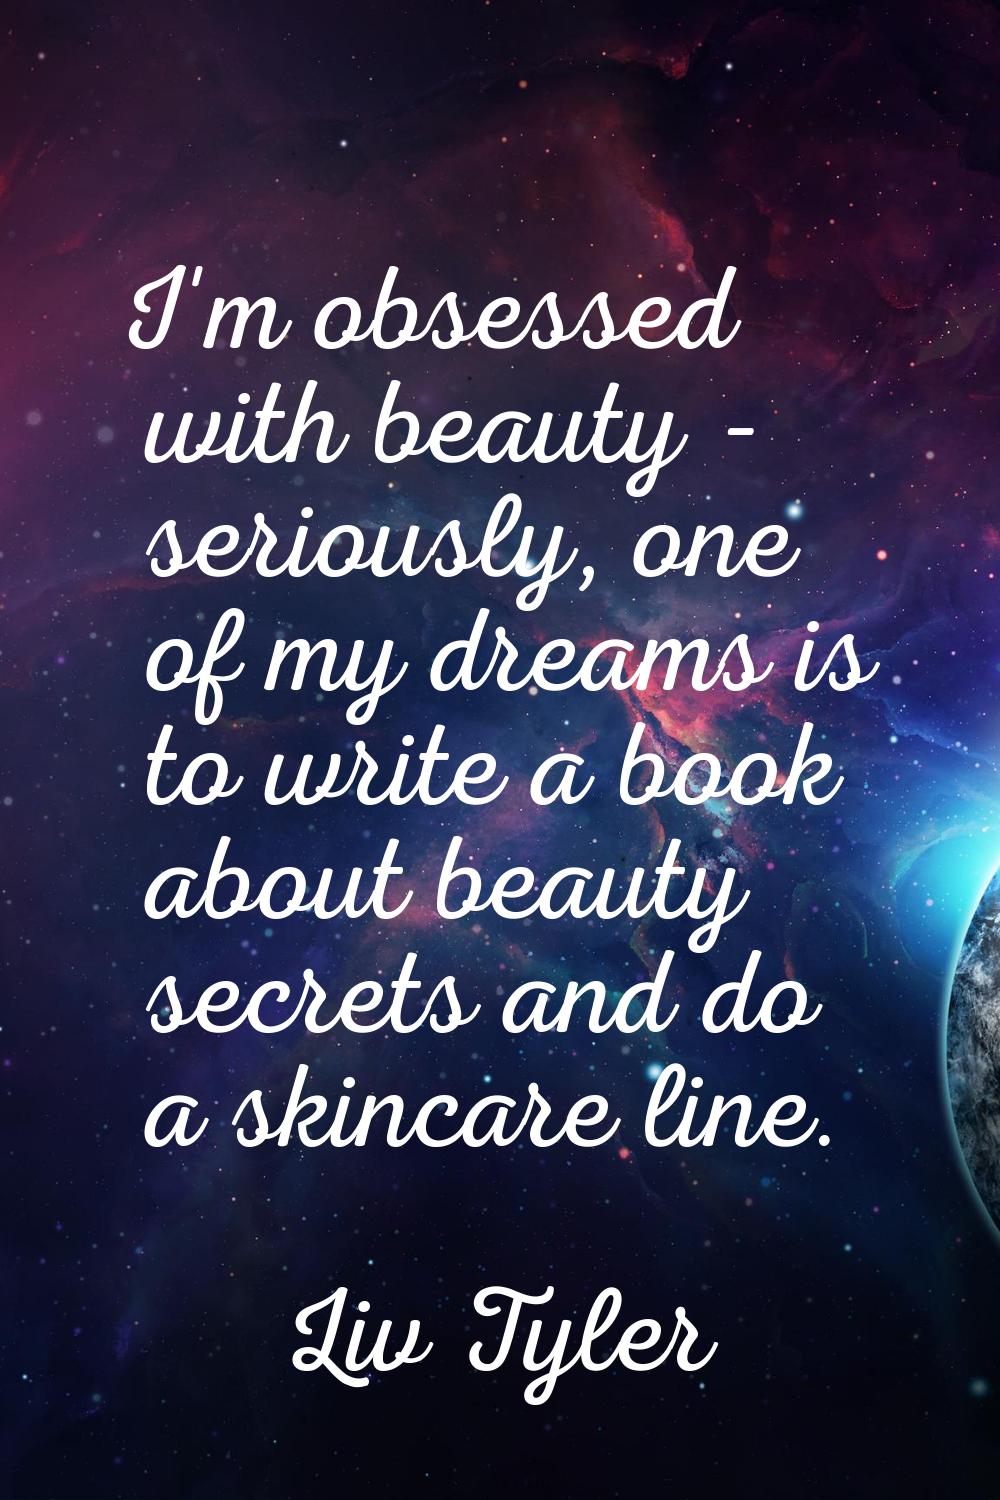 I'm obsessed with beauty - seriously, one of my dreams is to write a book about beauty secrets and 